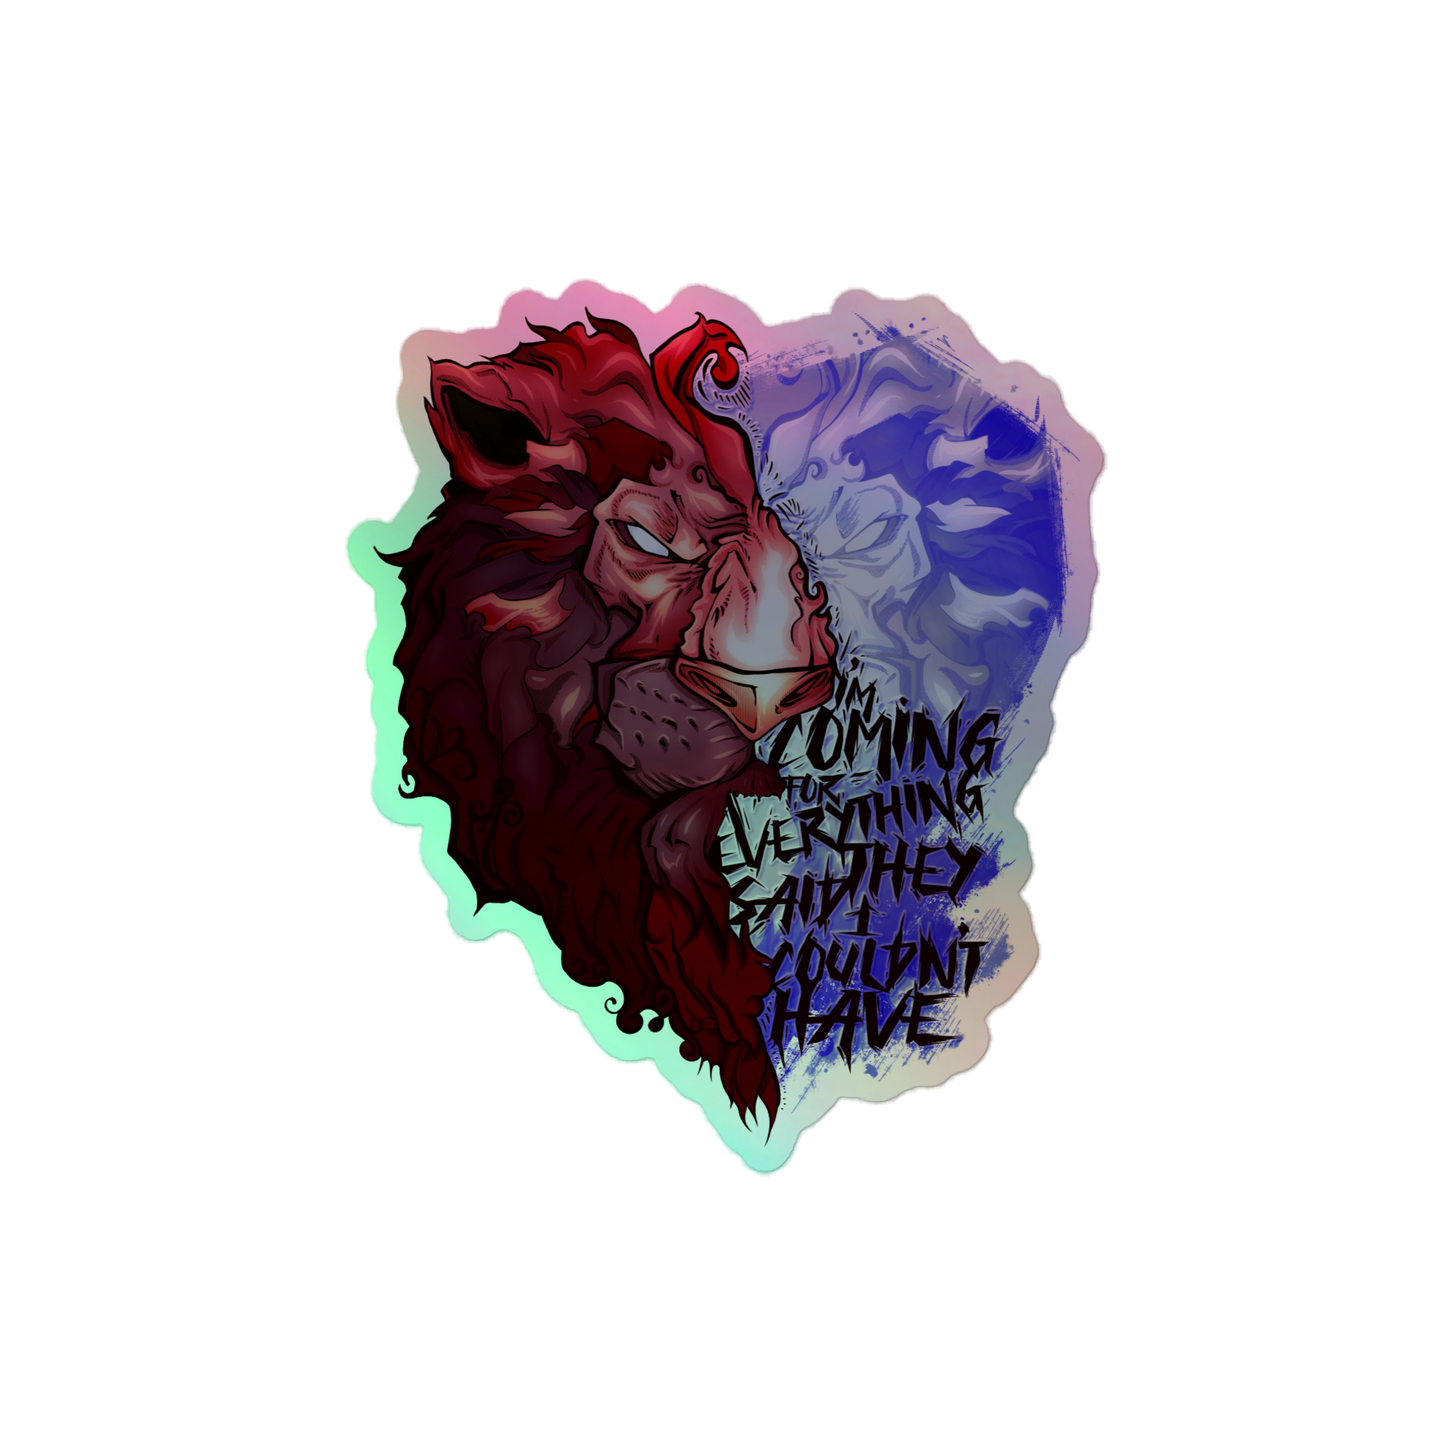 Holographic Sticker "Coming For Everything...", Fire and Ice Version